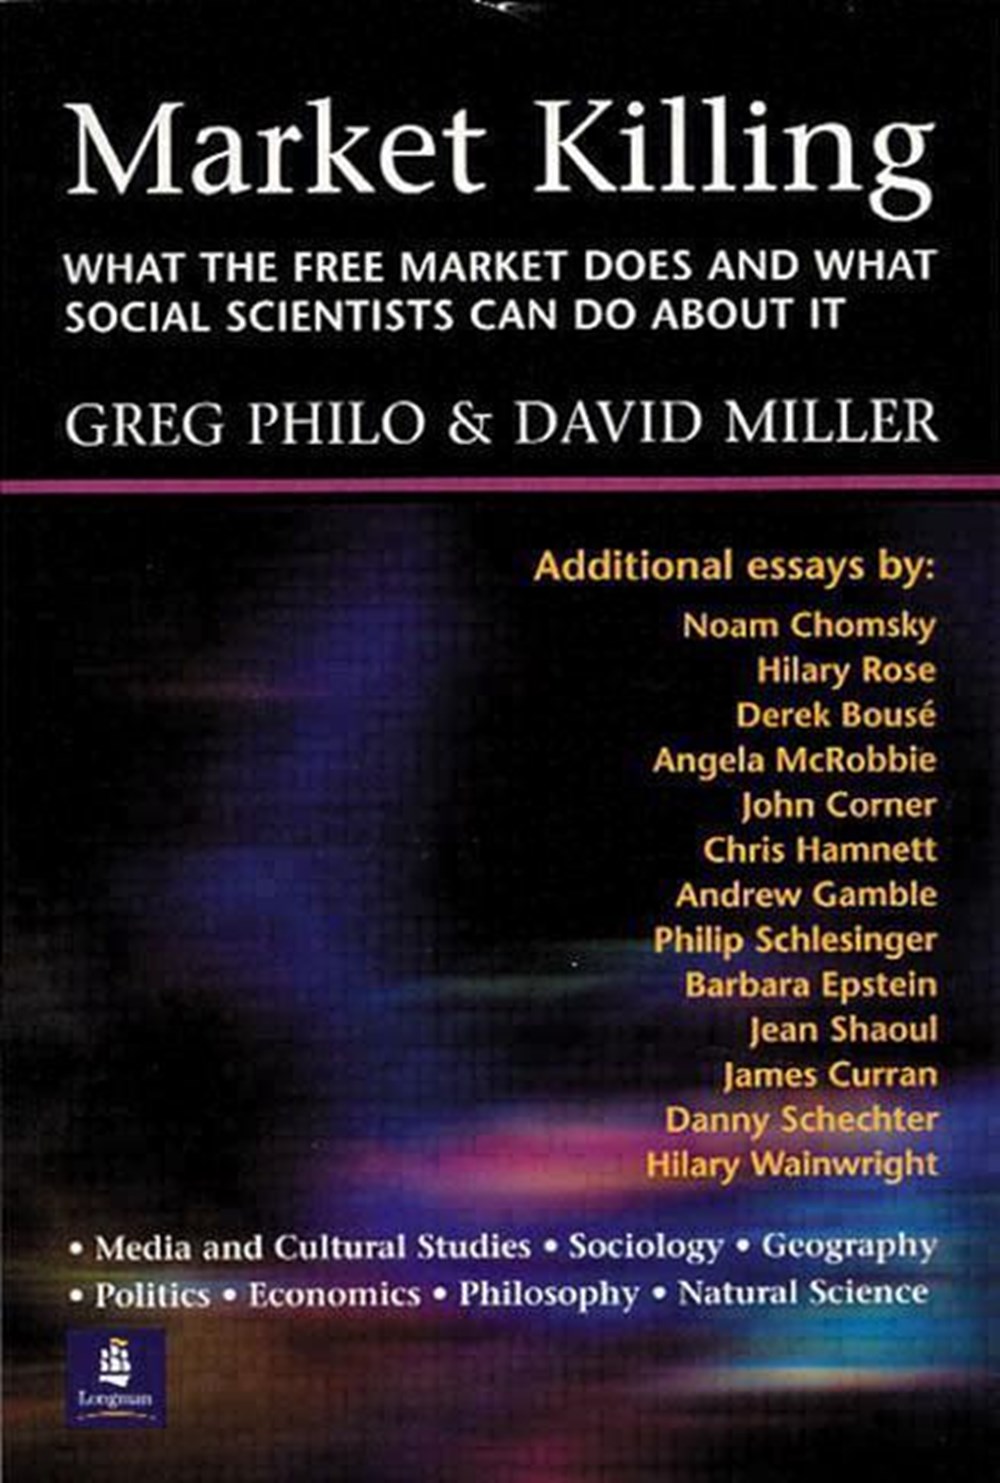 Market Killing: What the Free Market does and what social scientists can do about it